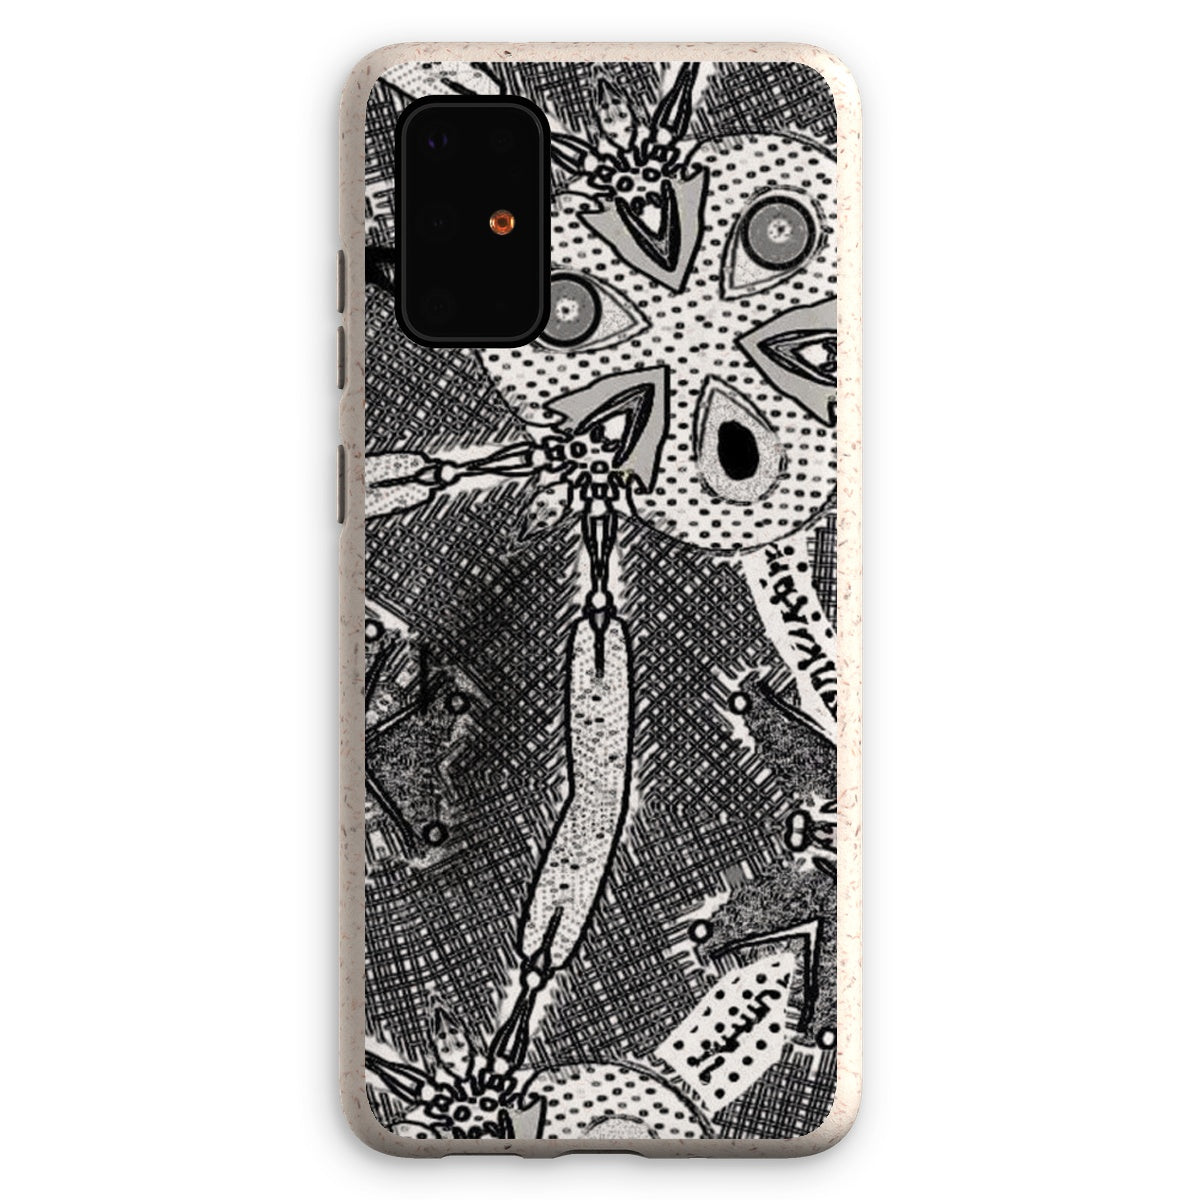 Snakes Eco Phone Case